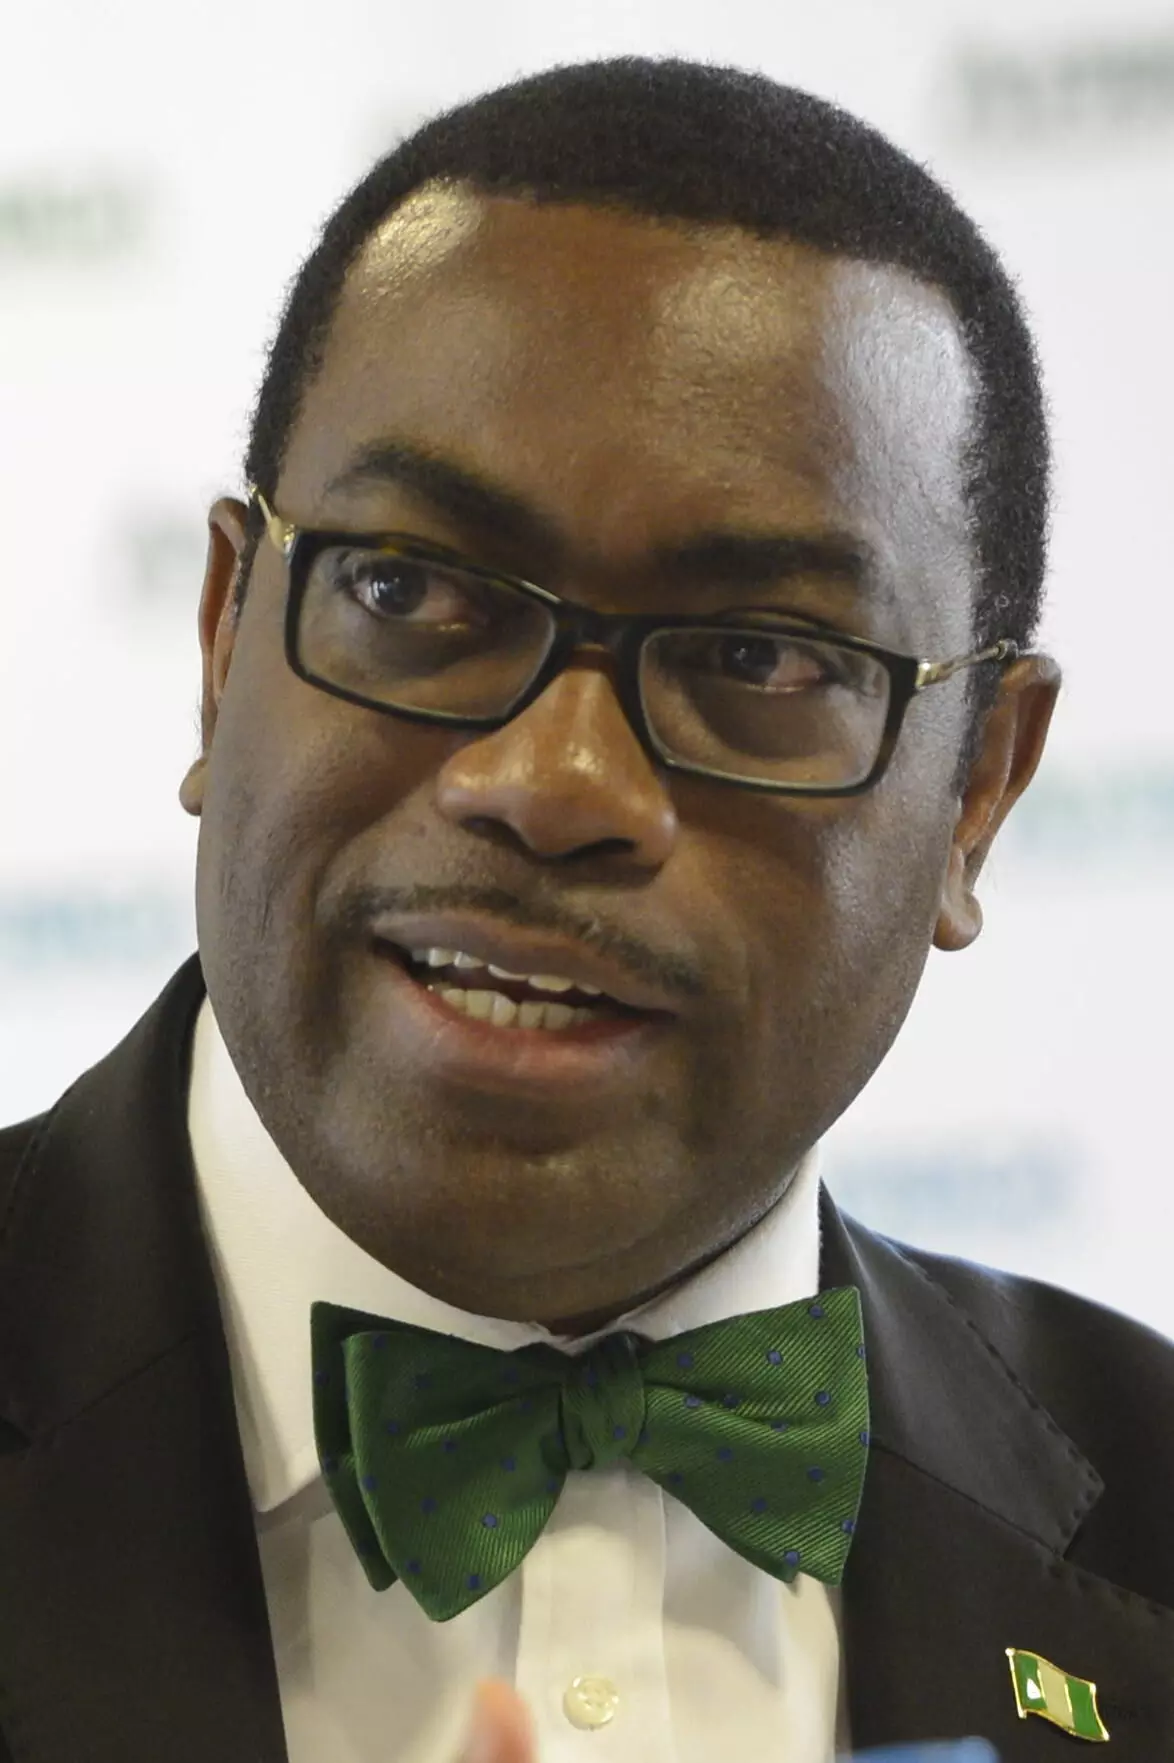 Africa highly vulnerable to commodity price volatility - Adesina